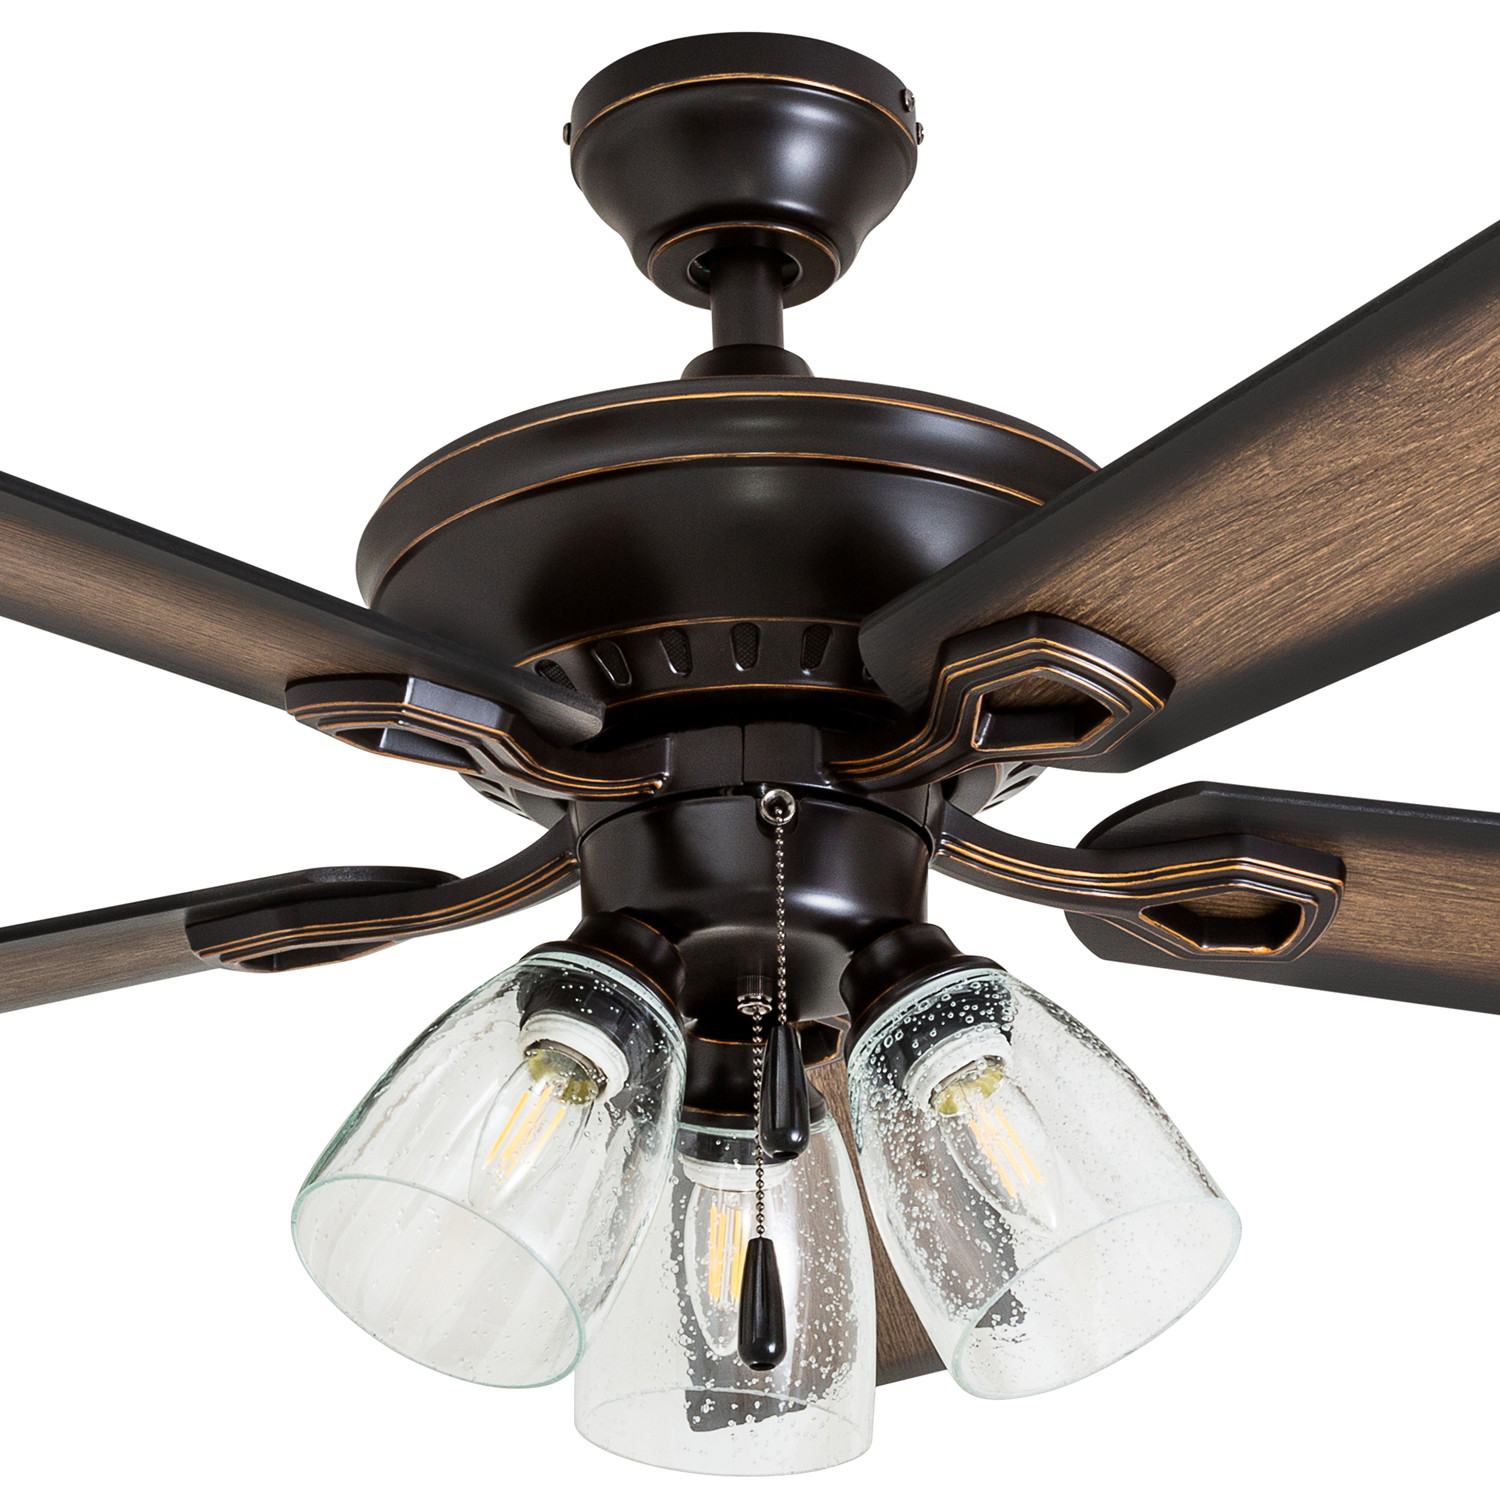 Prominence Home Glenmont Glenmont 52" 5 Blade LED Indoor Ceiling Fan